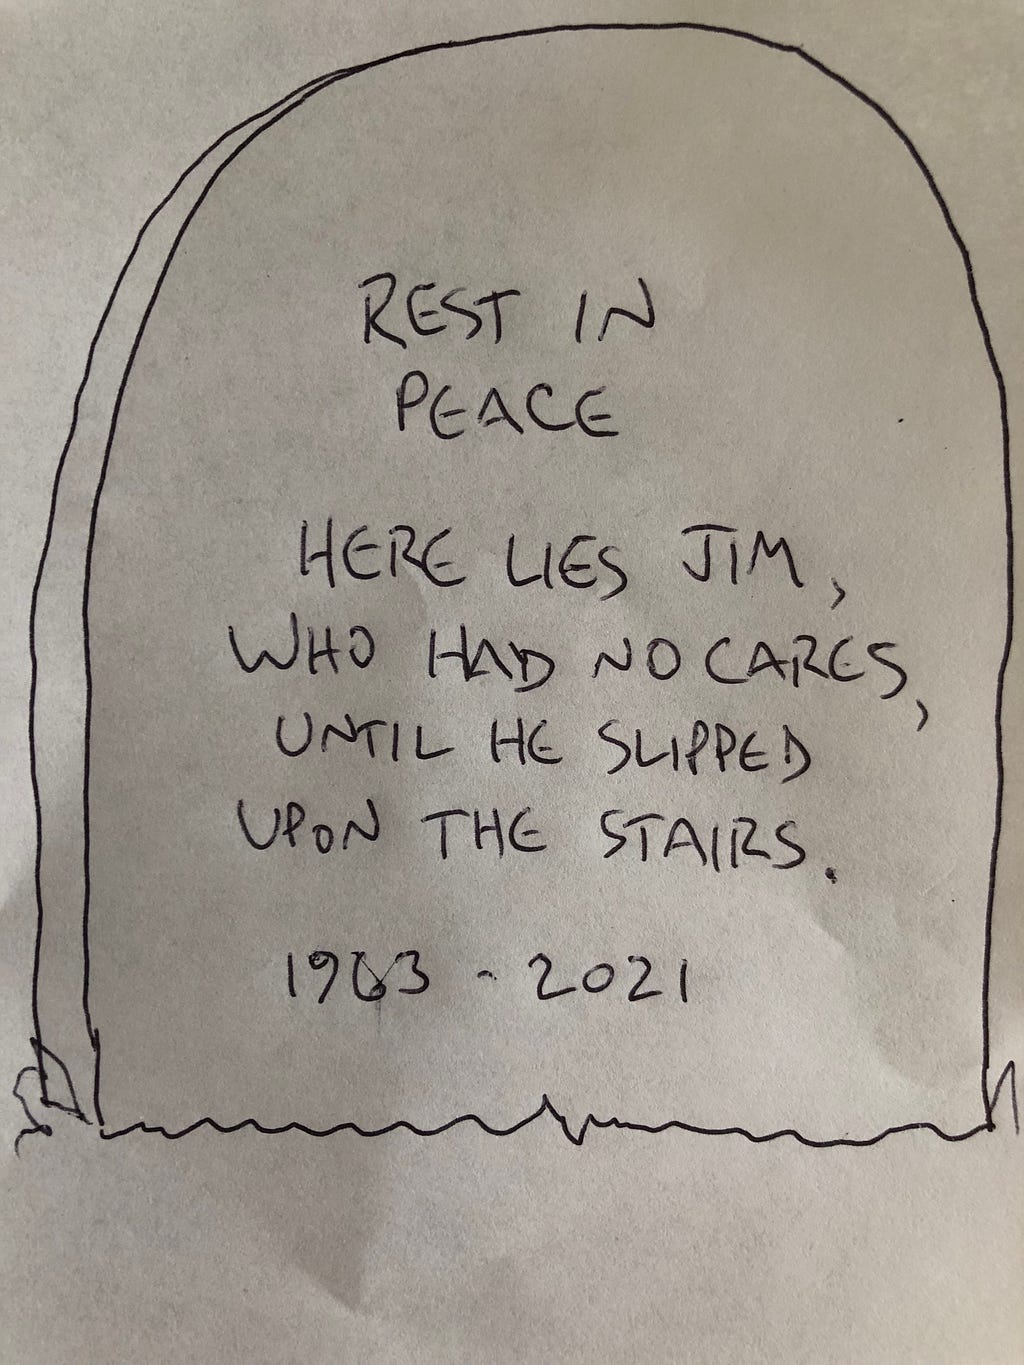 Tombstone saying “REST IN PEACE. HERE LIES JIM, WHO HAD NO CARES, UNTIL HE SLIPPED UPON THE STAIRS.”